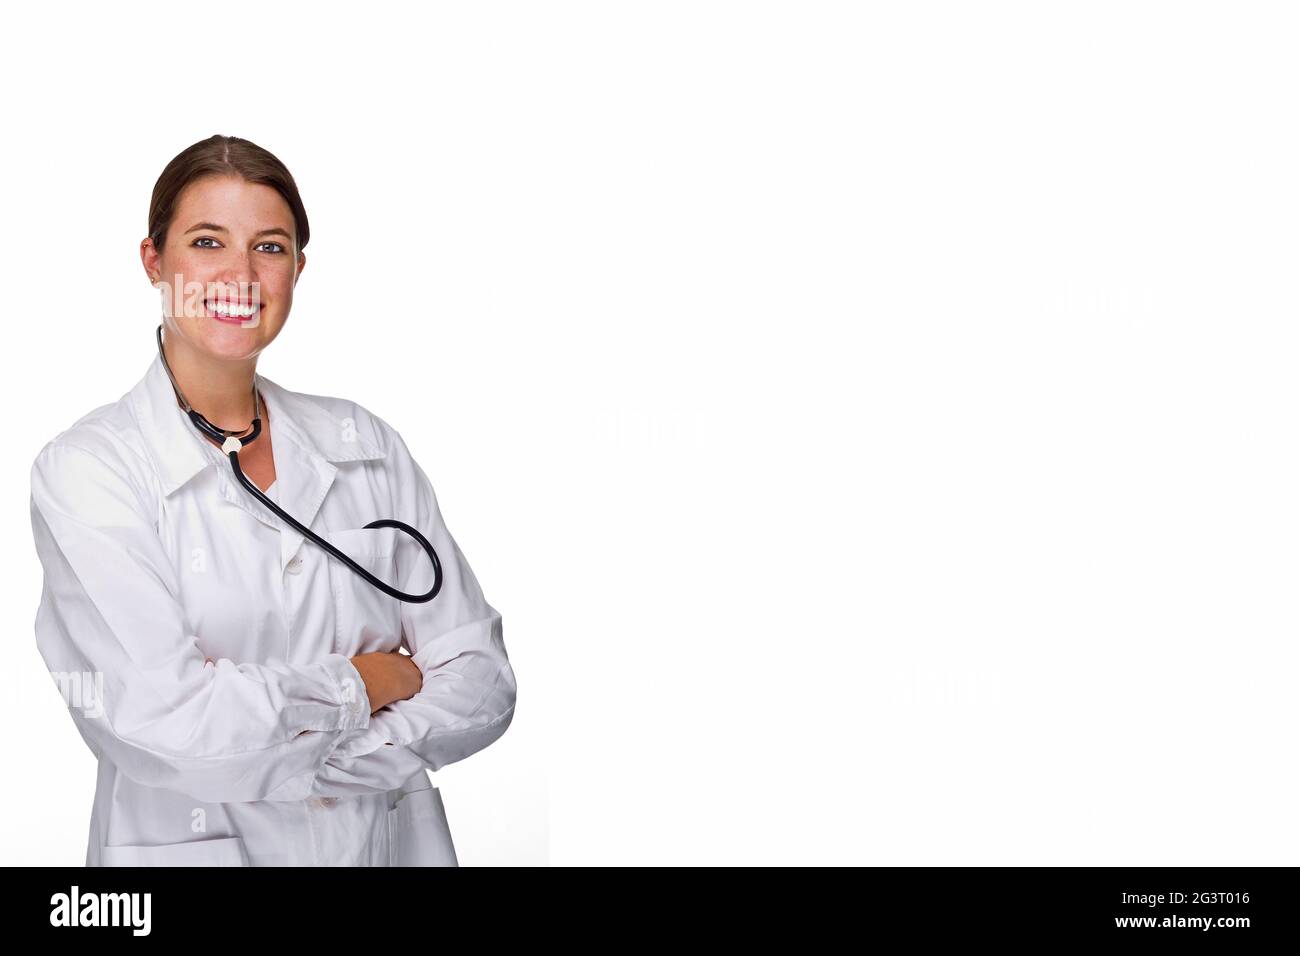 Young female doctor with stethoscope Banque D'Images